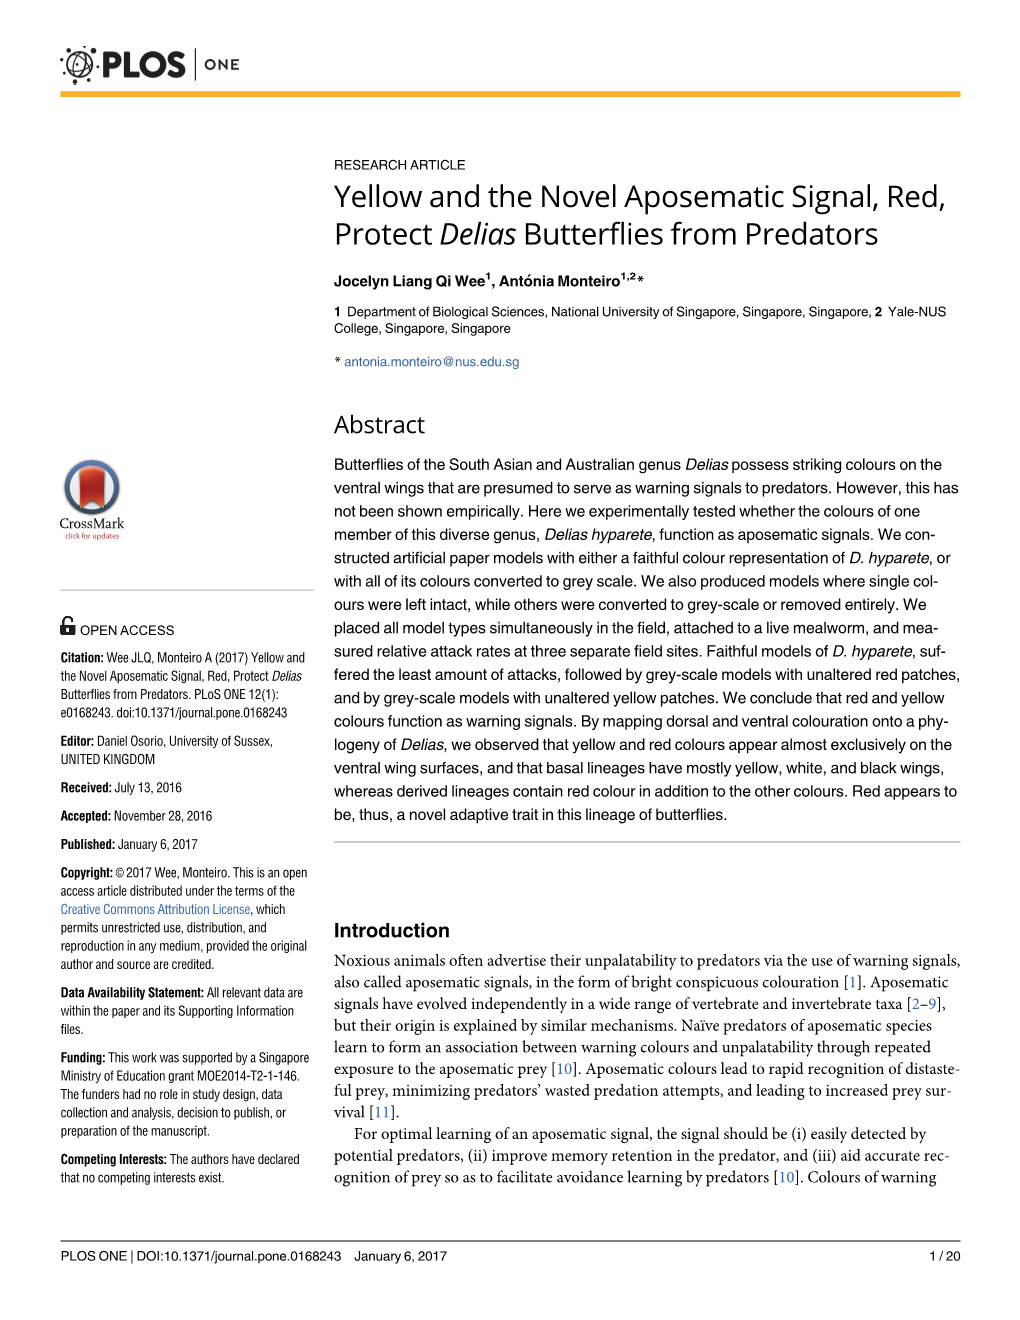 Yellow and the Novel Aposematic Signal, Red, Protect Delias Butterflies from Predators